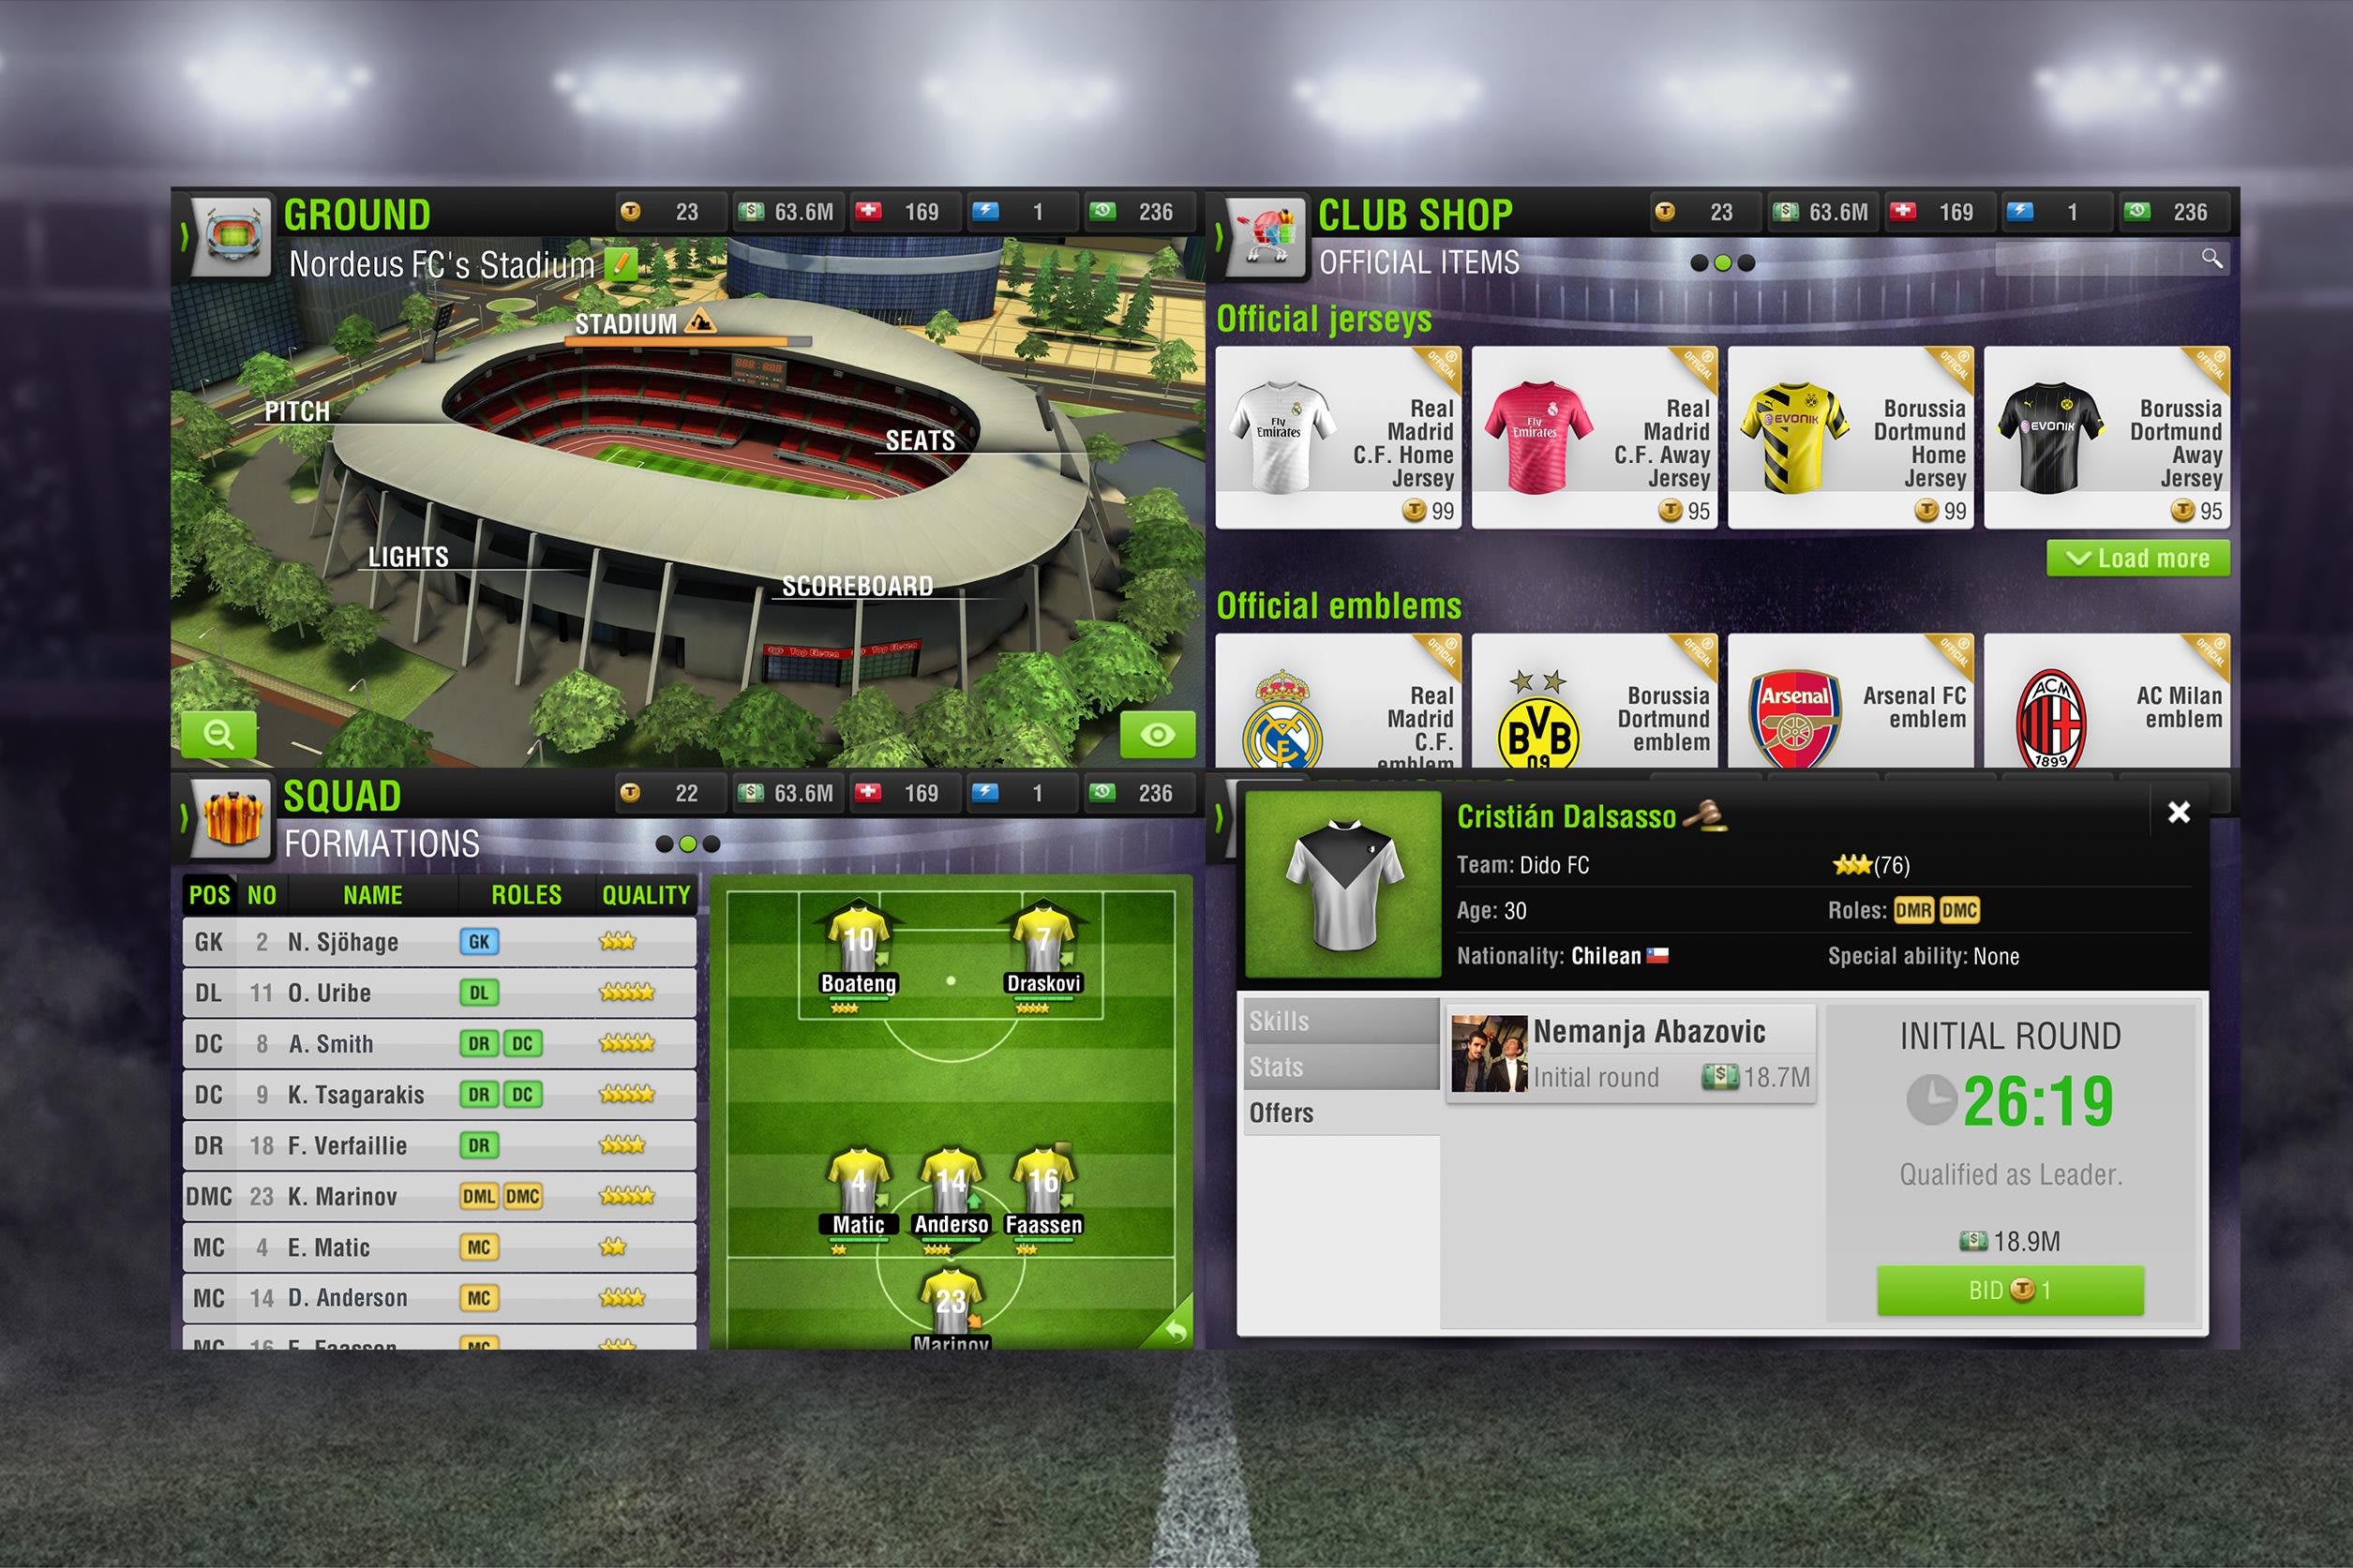 top eleven 2012 download free